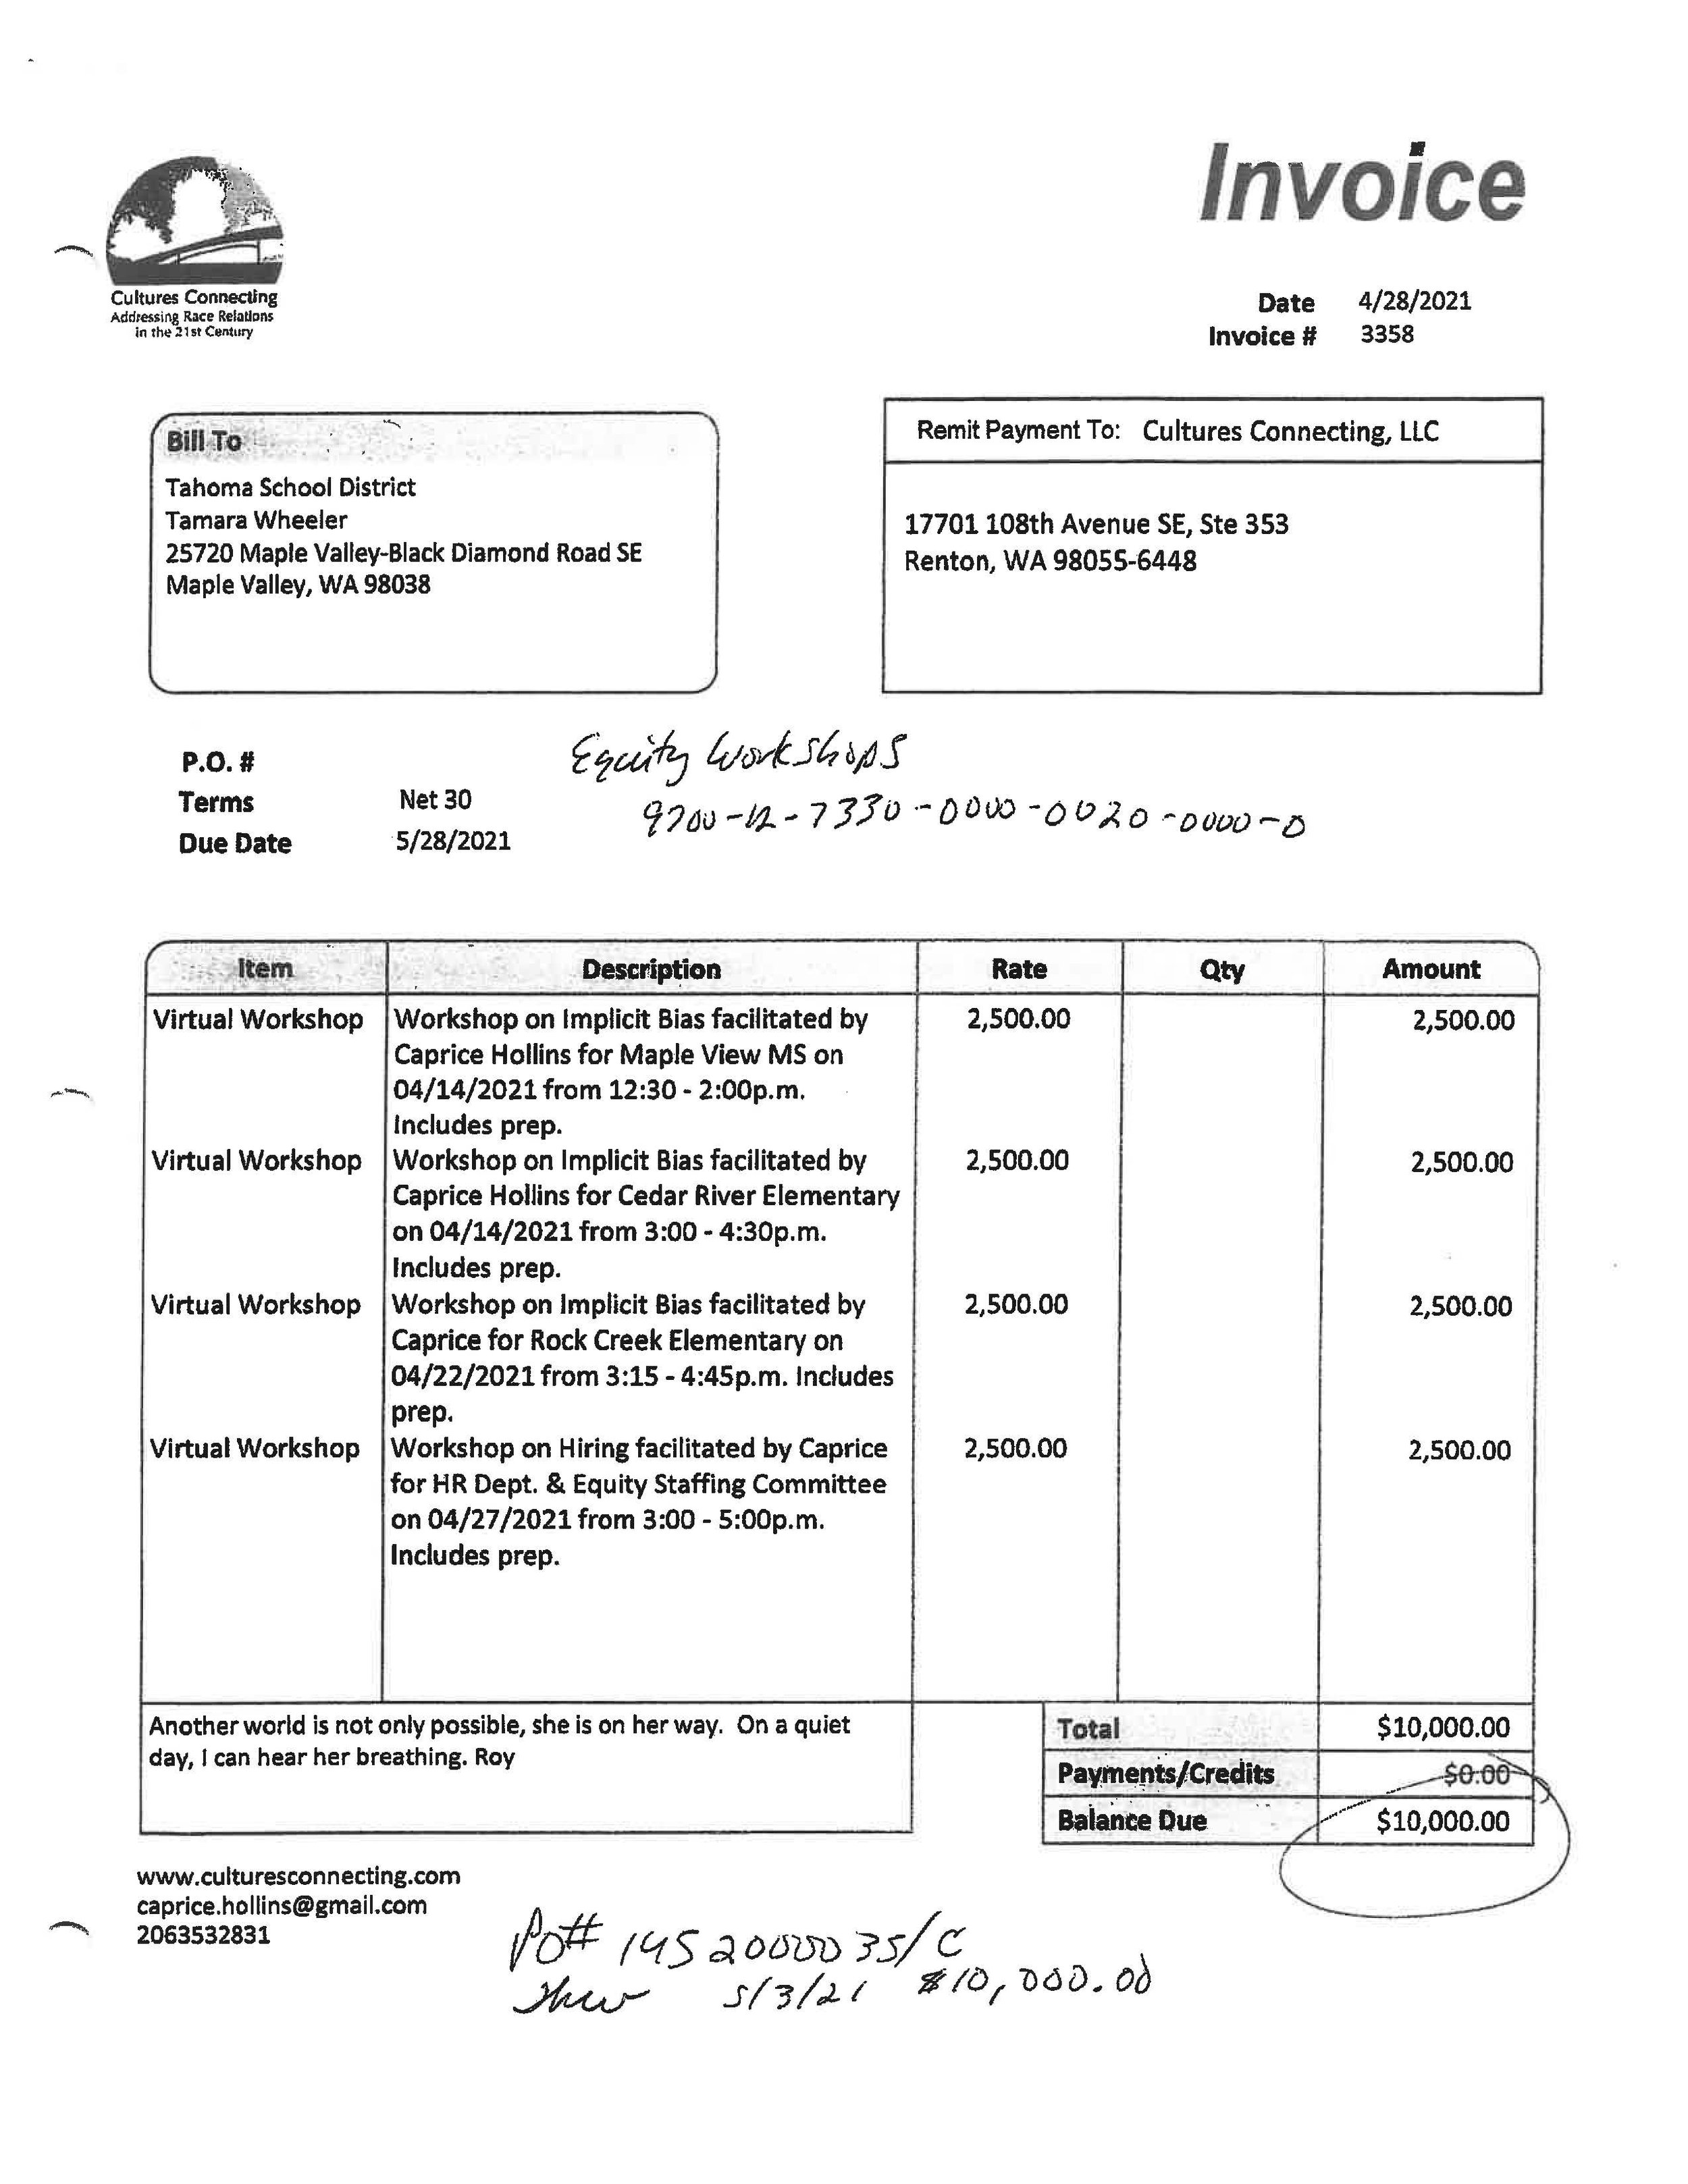 CH invoices_Page_11.jpg